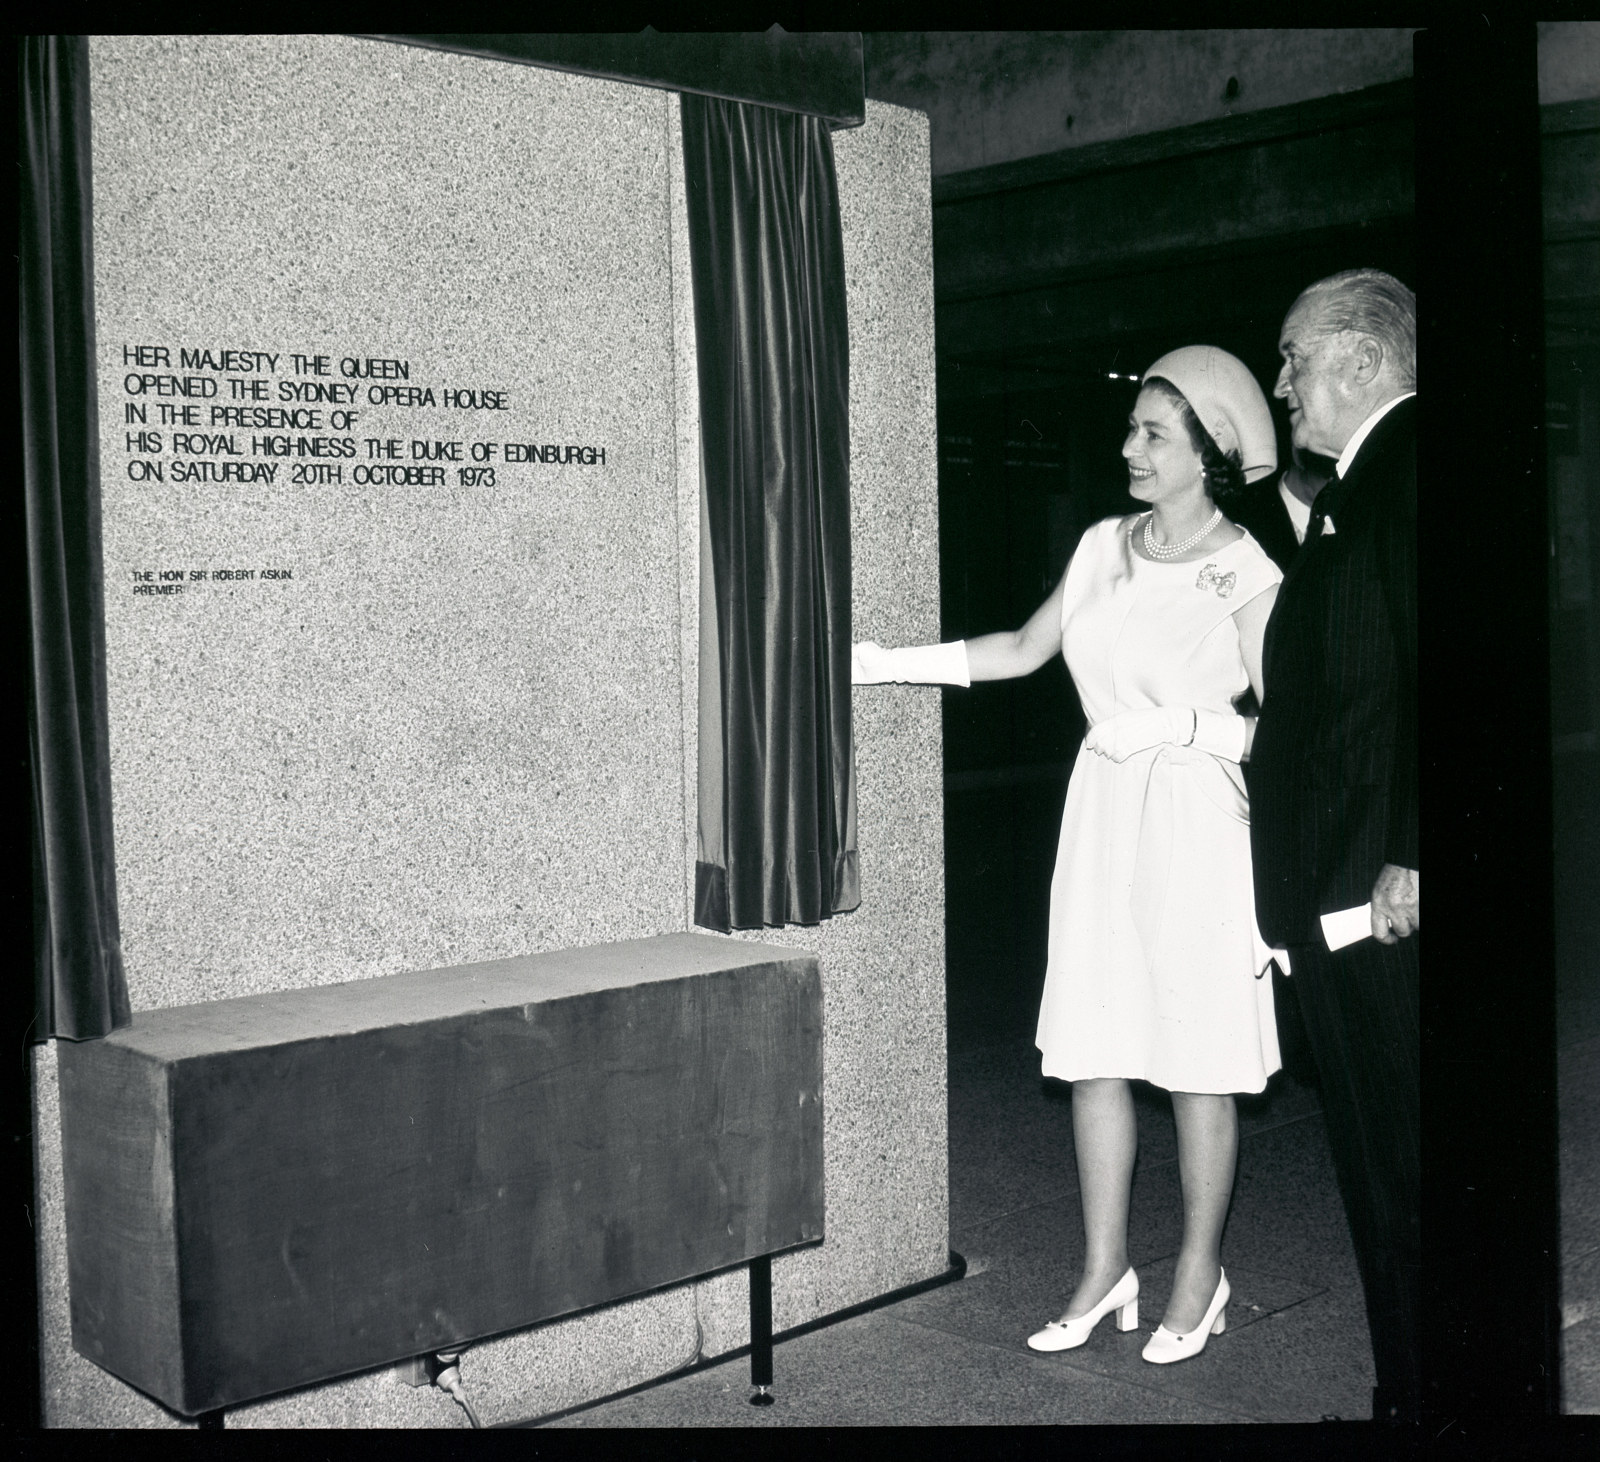 HM the Queen, accompanied by Sir Robert Askin, unveiling the ‘plaque’ recording the official opening of the Opera House. October 20th 1973.